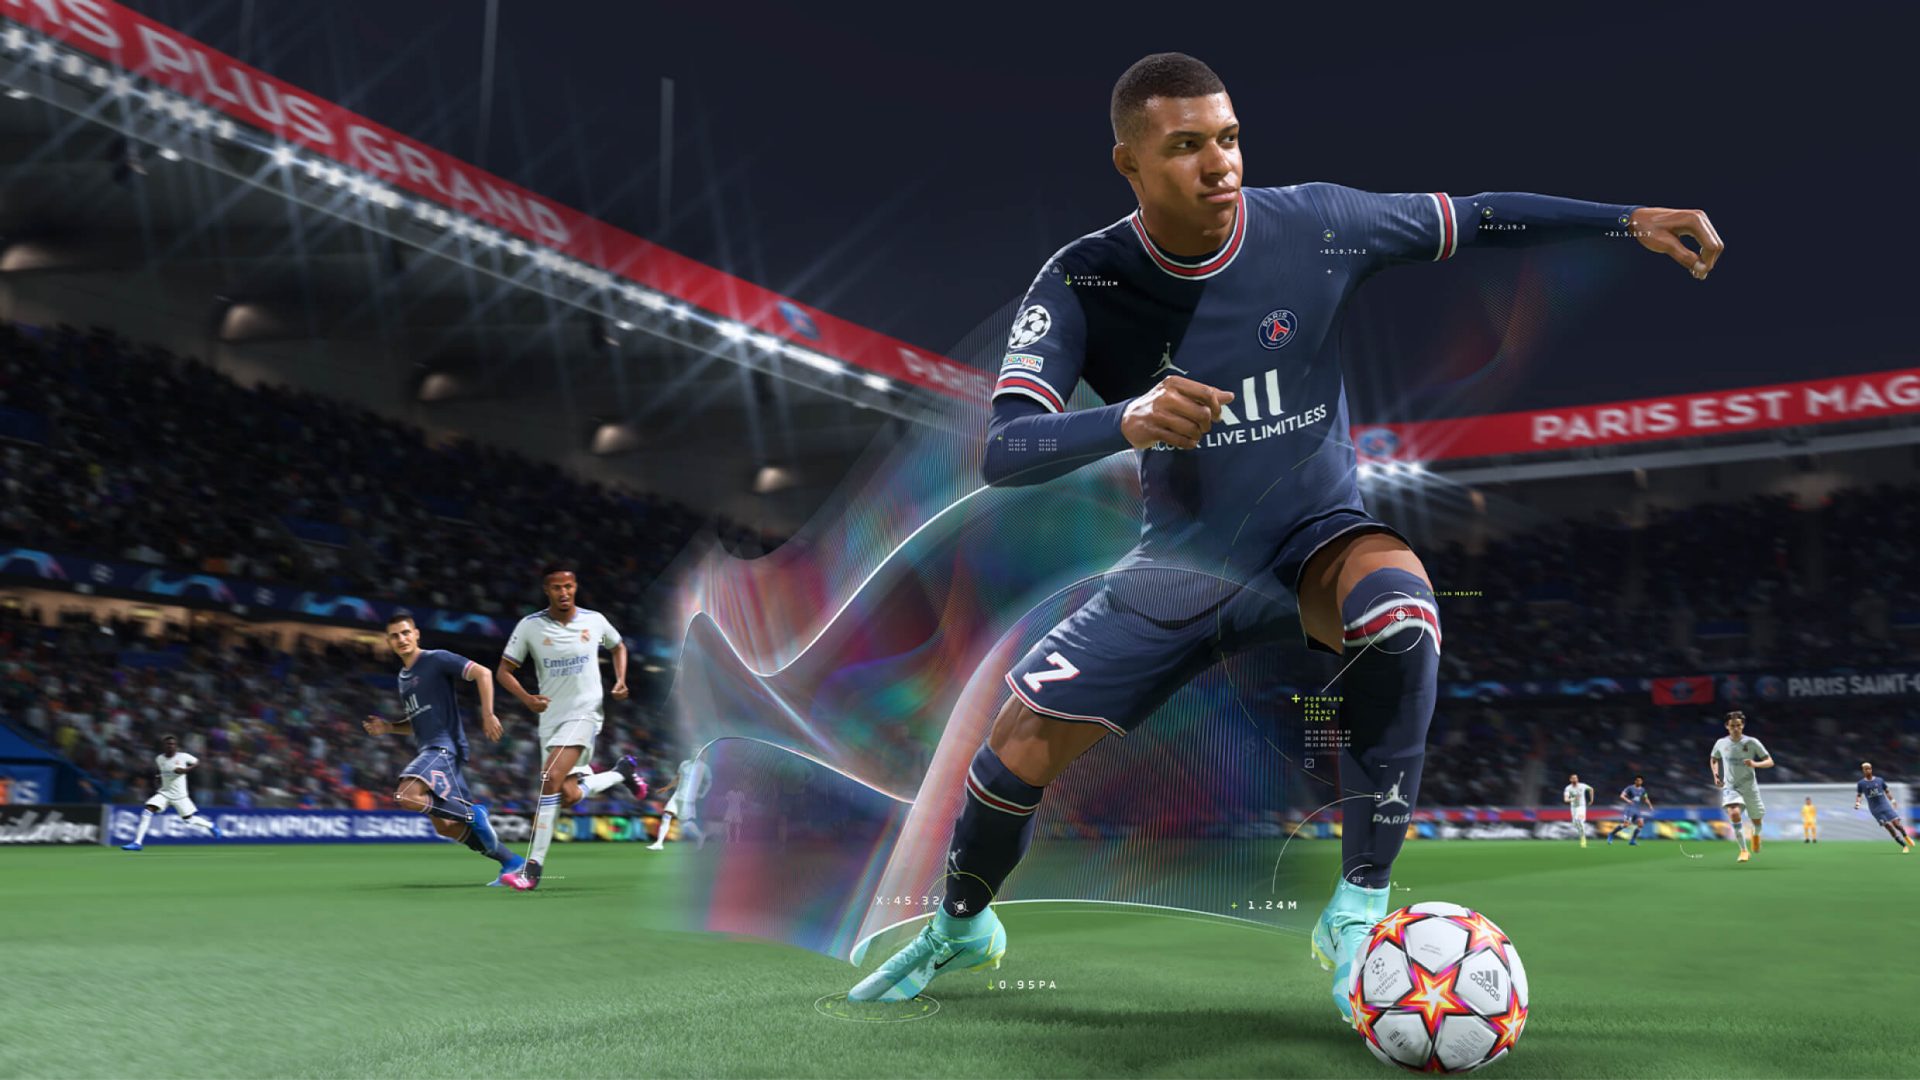 Is Fifa 23 Cross Platform Compatible (A Guide For Players)